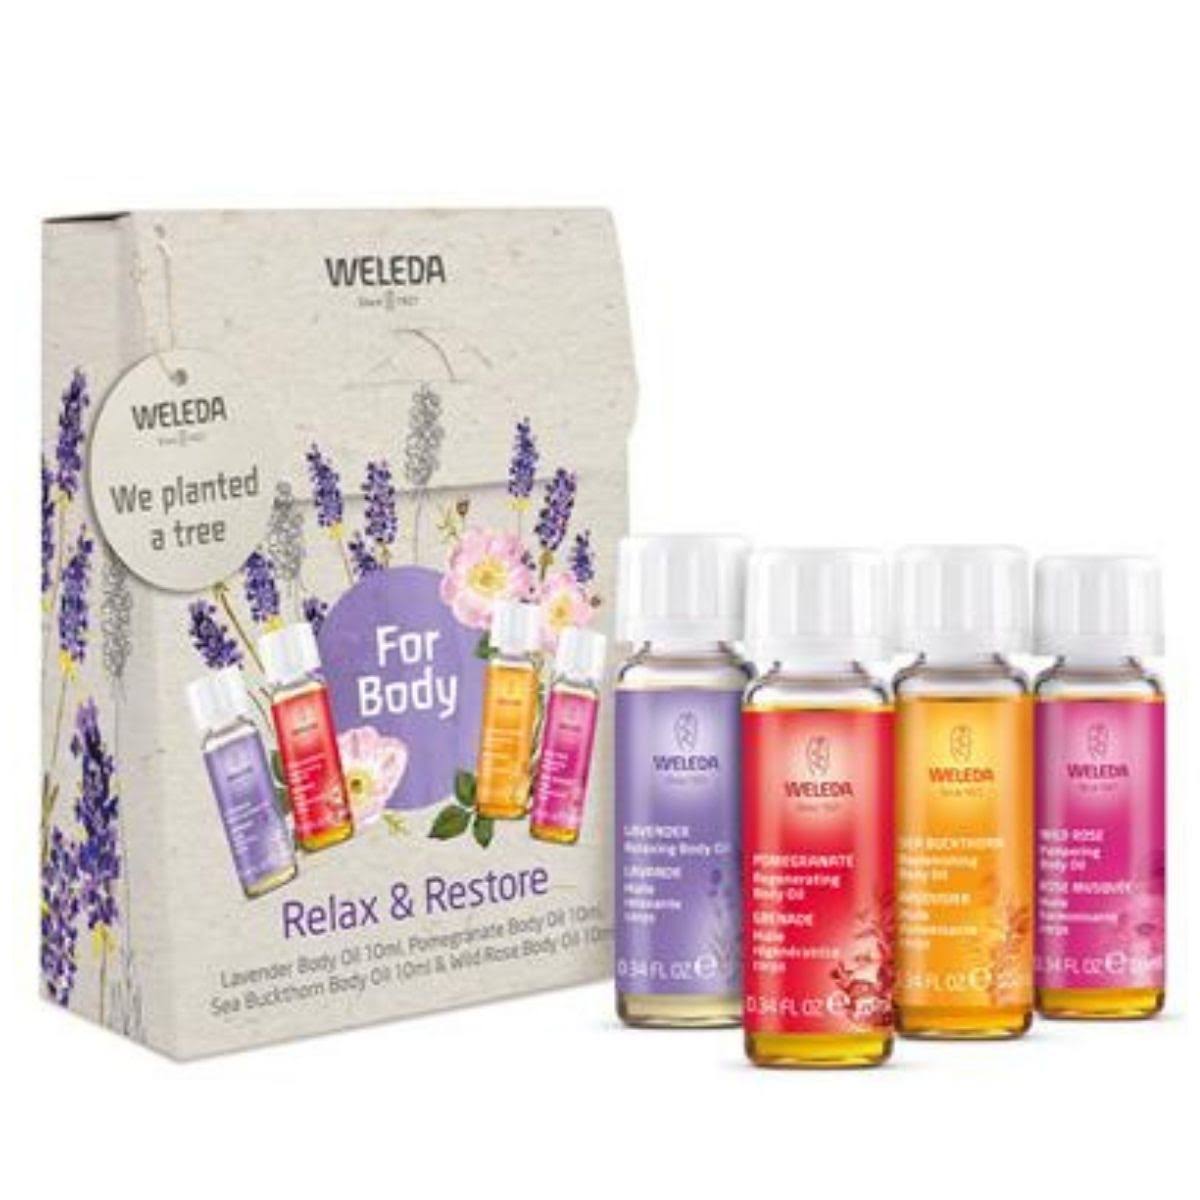 WELEDA - Relax and Restore Gift Set